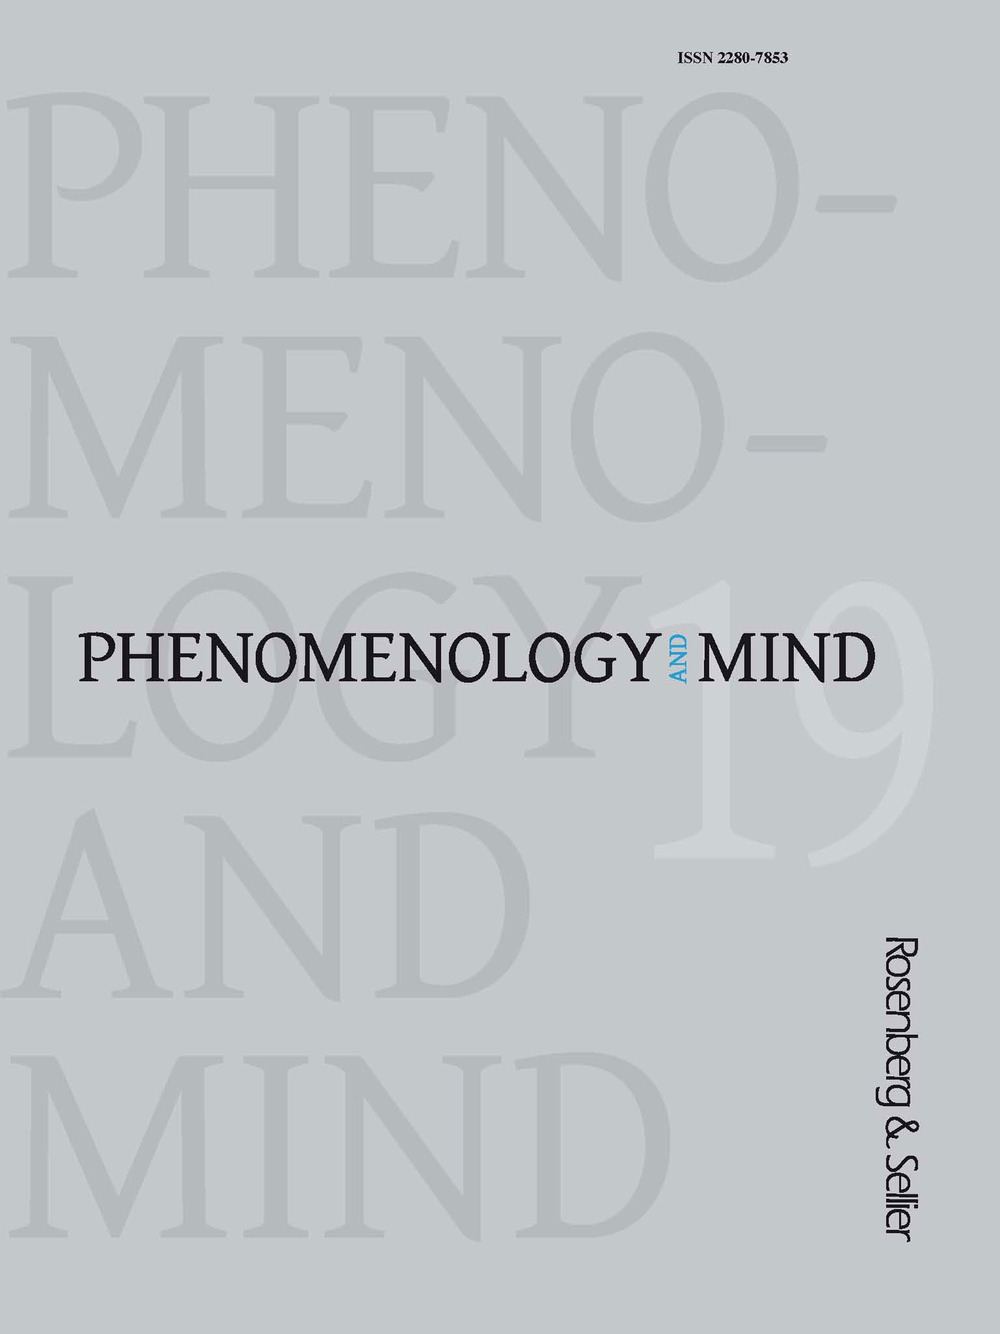 Phenomenology and mind (2020). Vol. 19: Human reproduction and parental responsibility: new theories, narratives, ethics